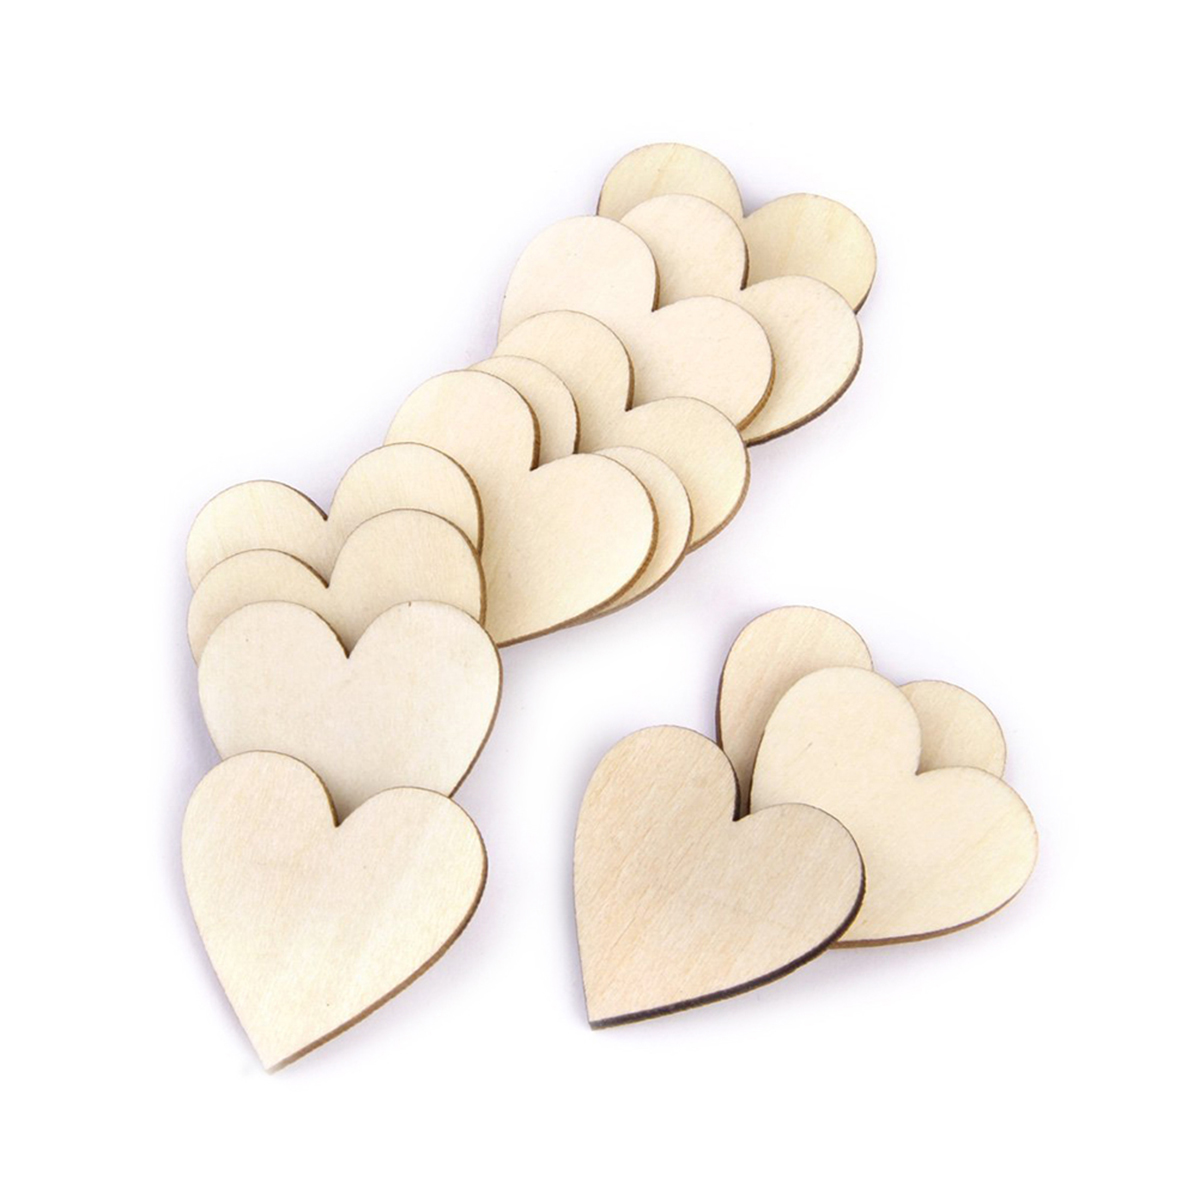 Wooden Wood Hearts Slices Crafts Blank Heart Small Discs Log DIY Unfinished Hole Chips Wedding Guest Book Mini